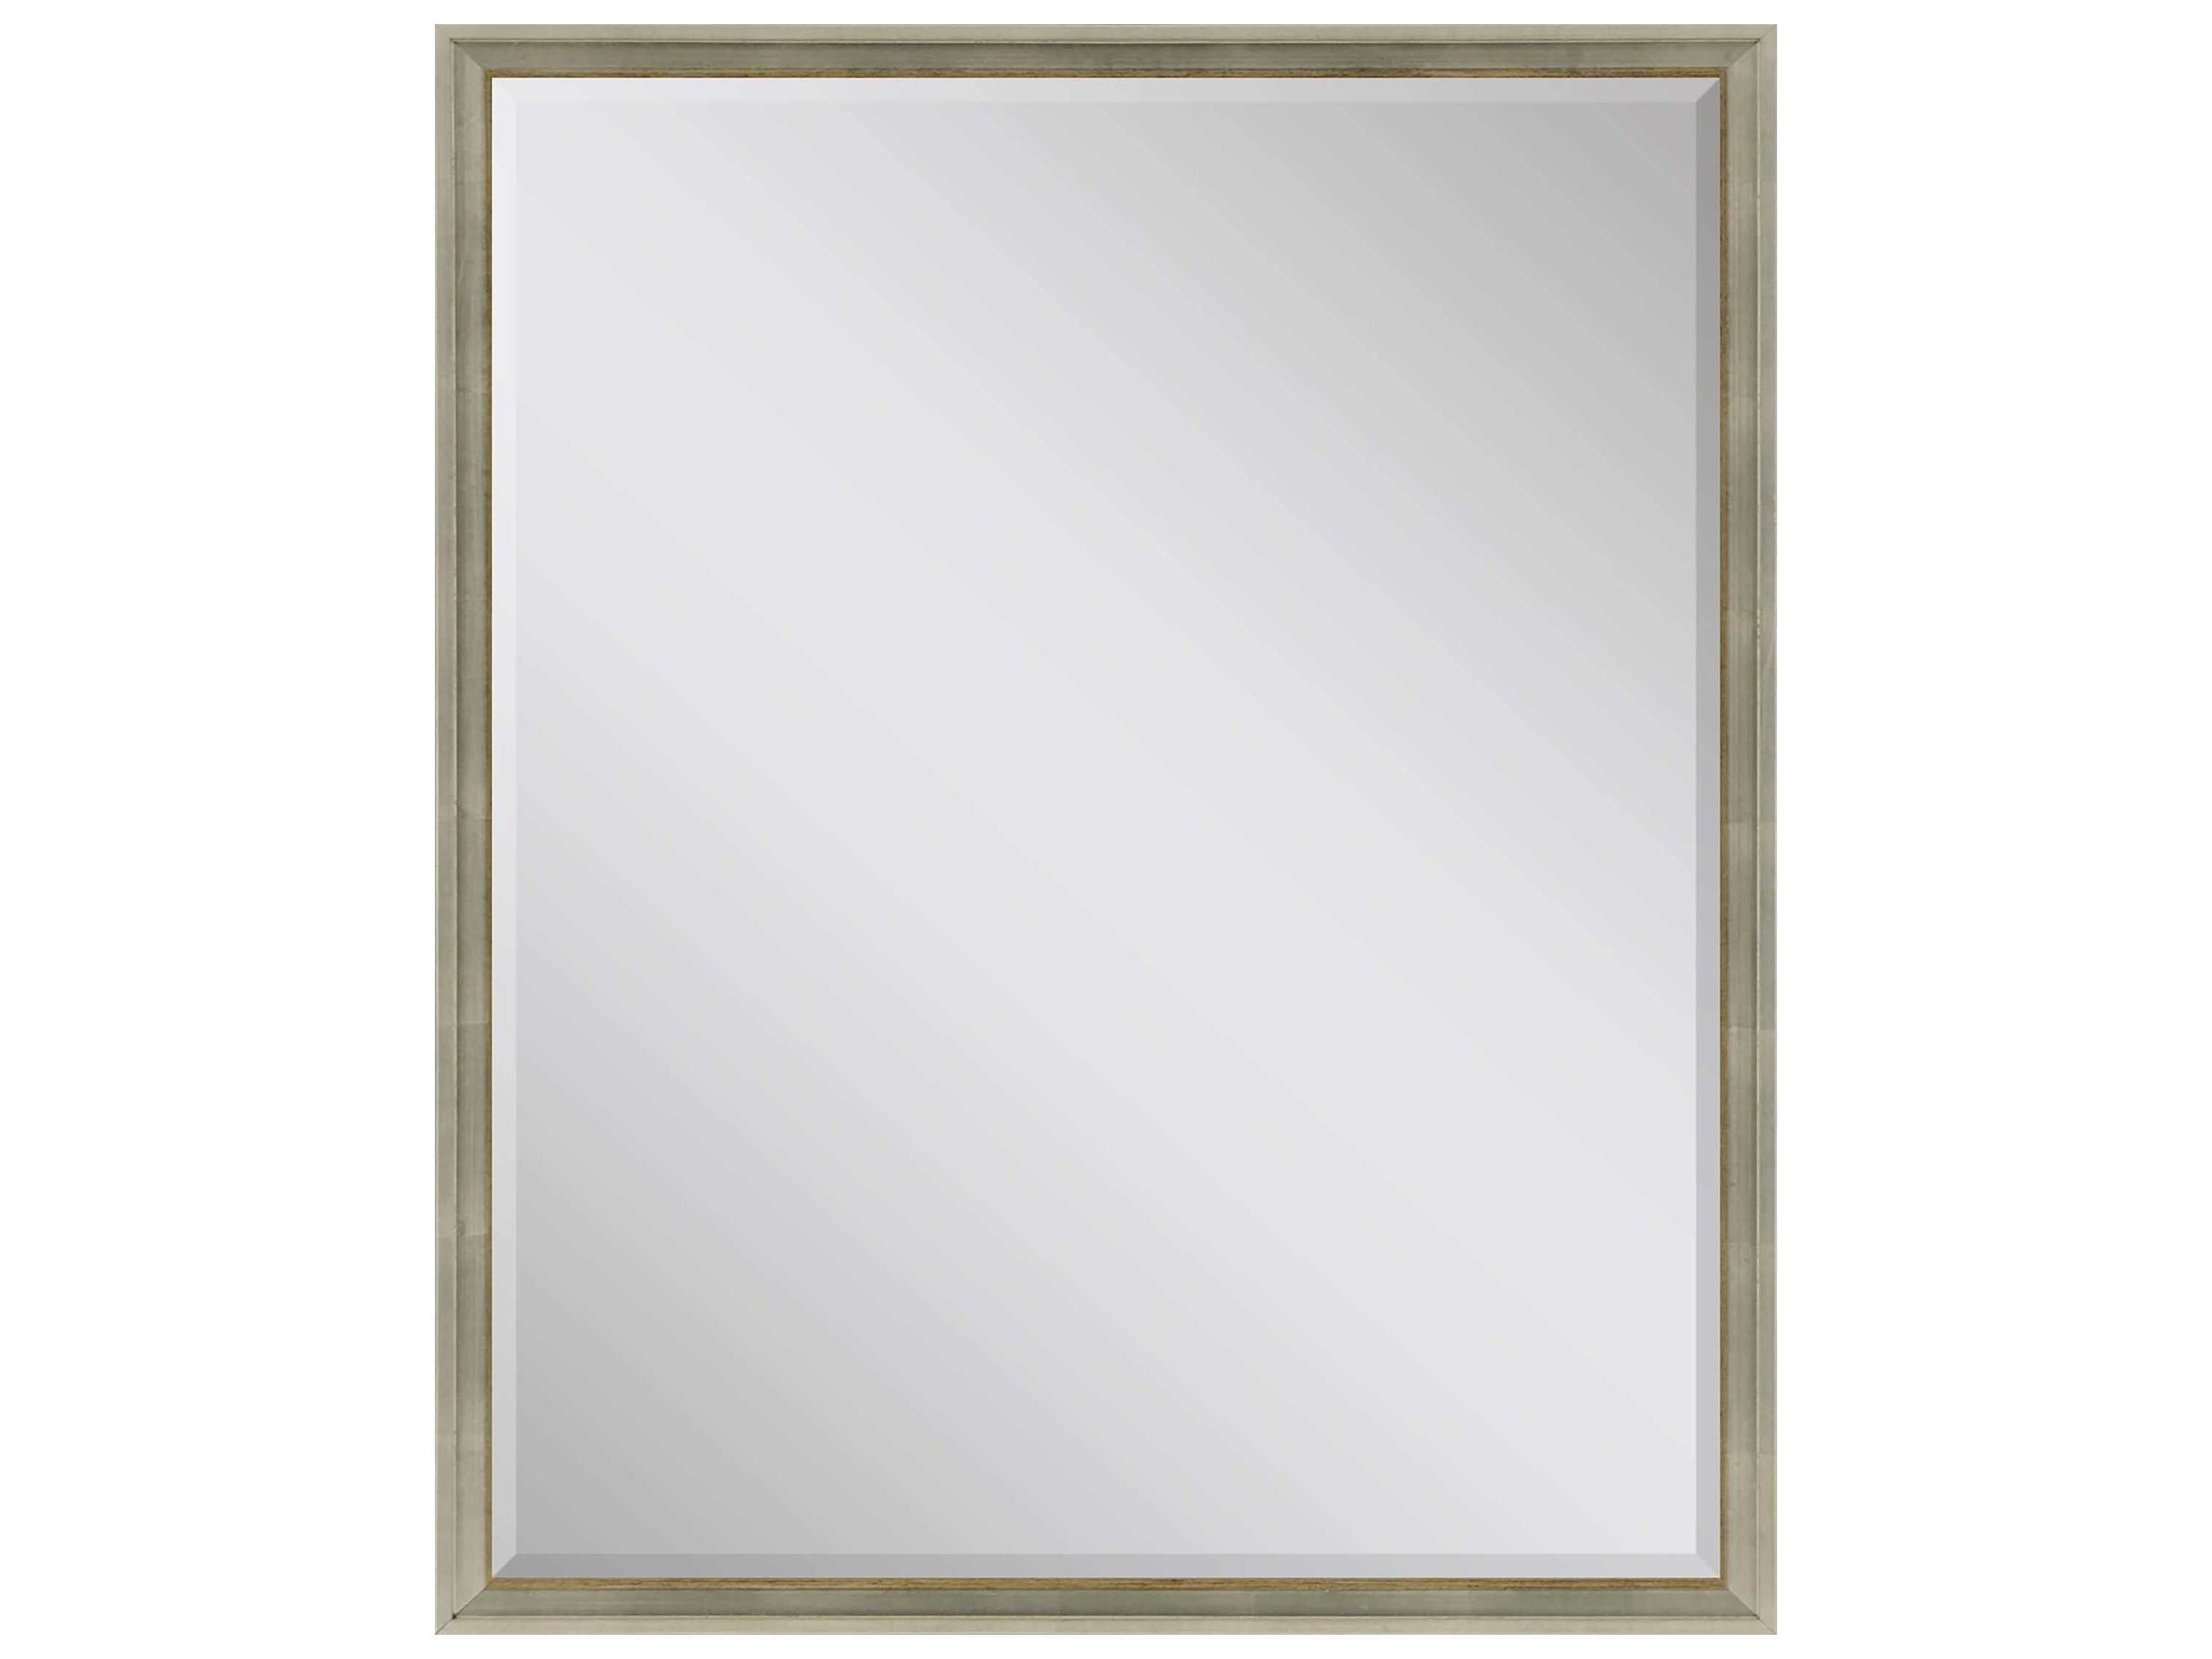 Paragon Beveled Mirror Intended For Popular Rectangle Pewter Beveled Wall Mirrors (View 13 of 20)